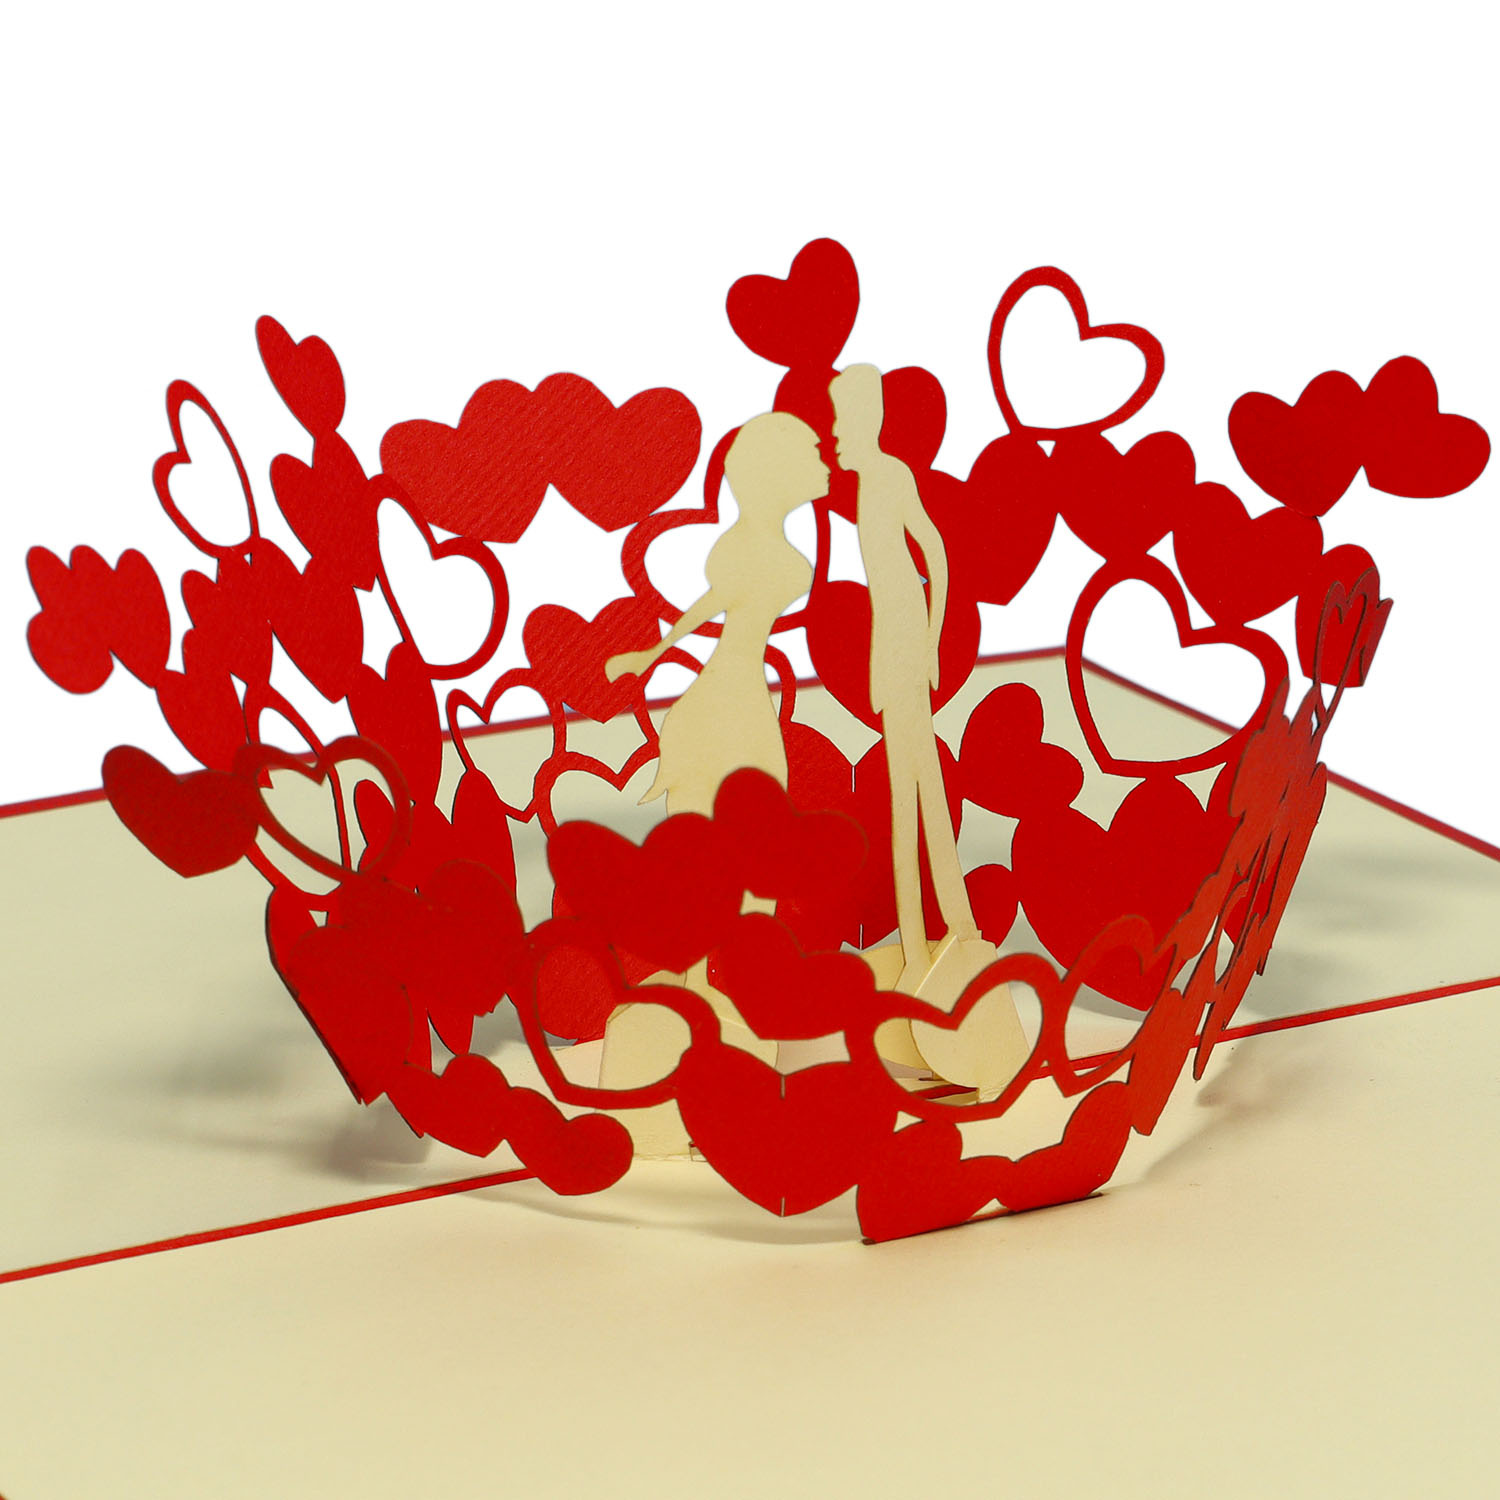 Pop Up 3D Card, Valentine's Day Card, Wedding Invitation, Wedding Card, Lovers LINPopUp®, N62